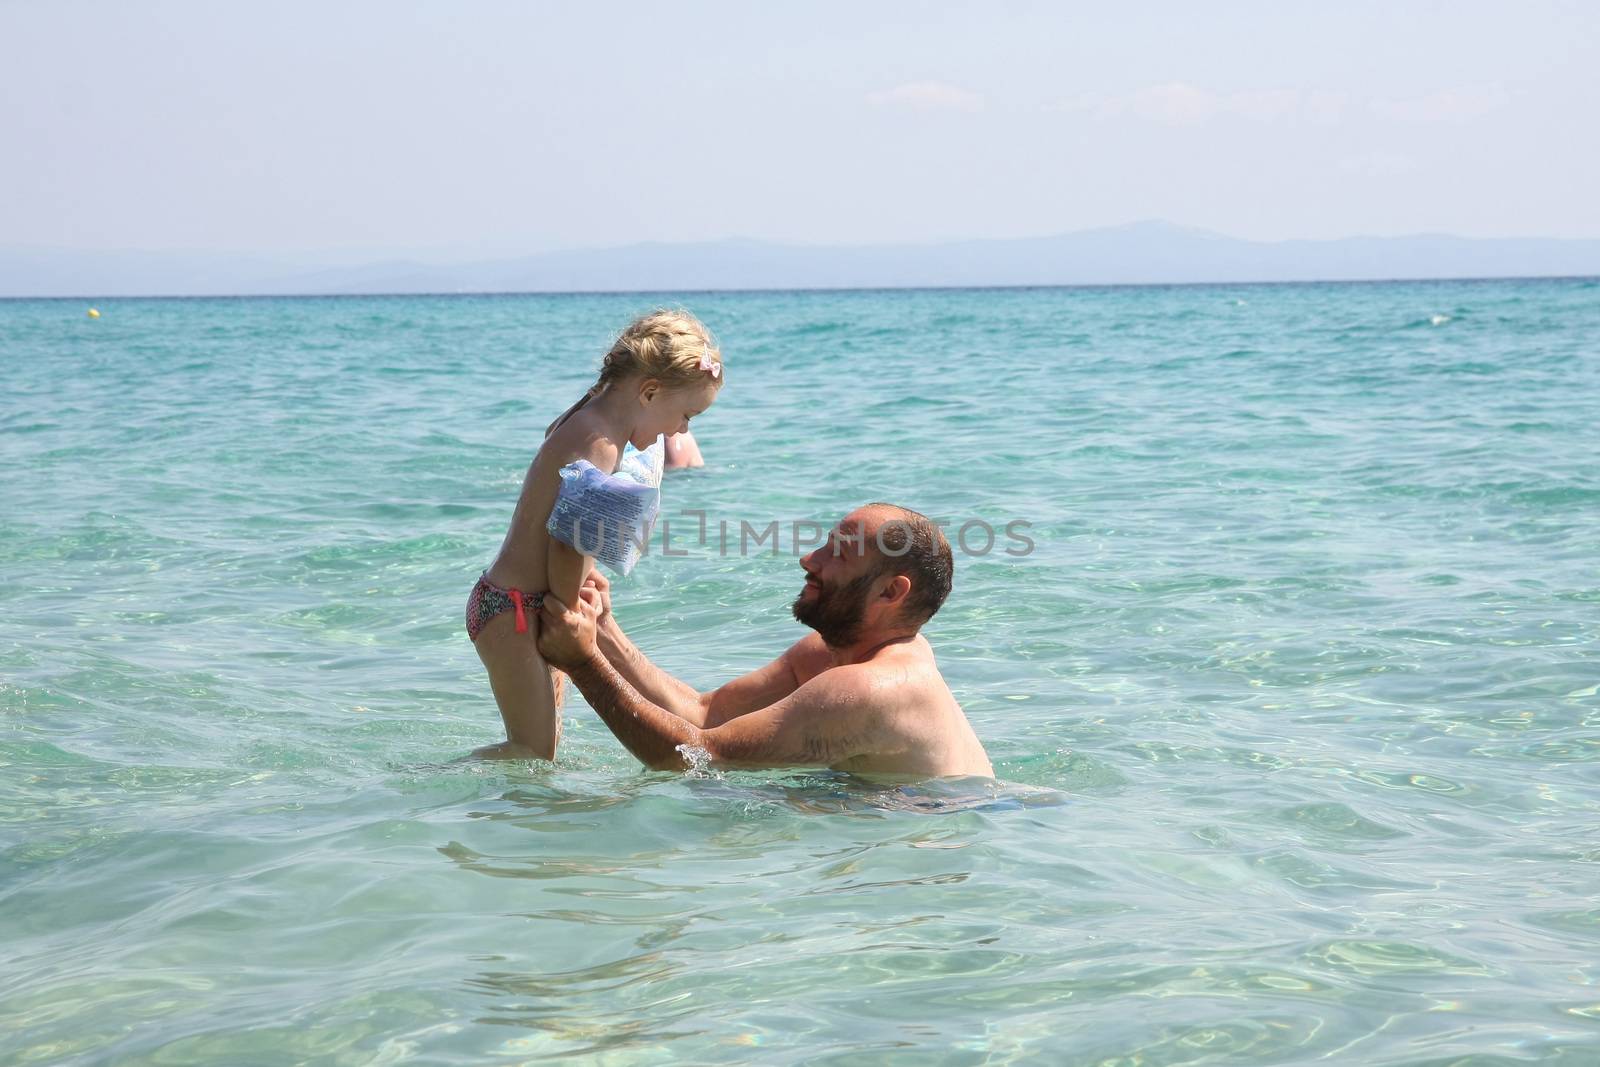 Father and daughter playing in the clear sea water